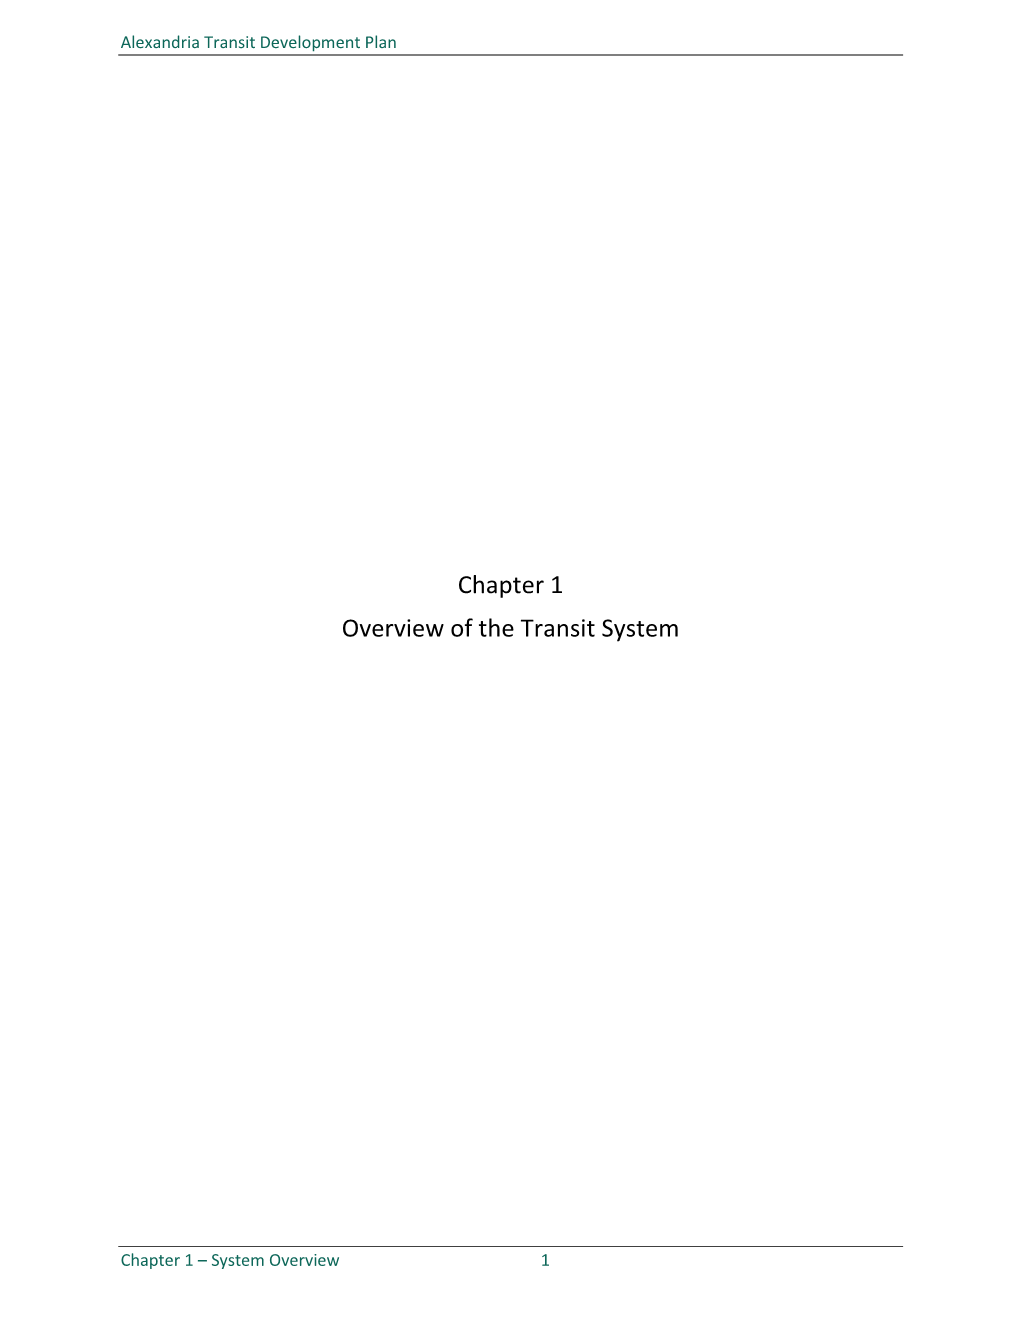 Chapter 1 Overview of the Transit System